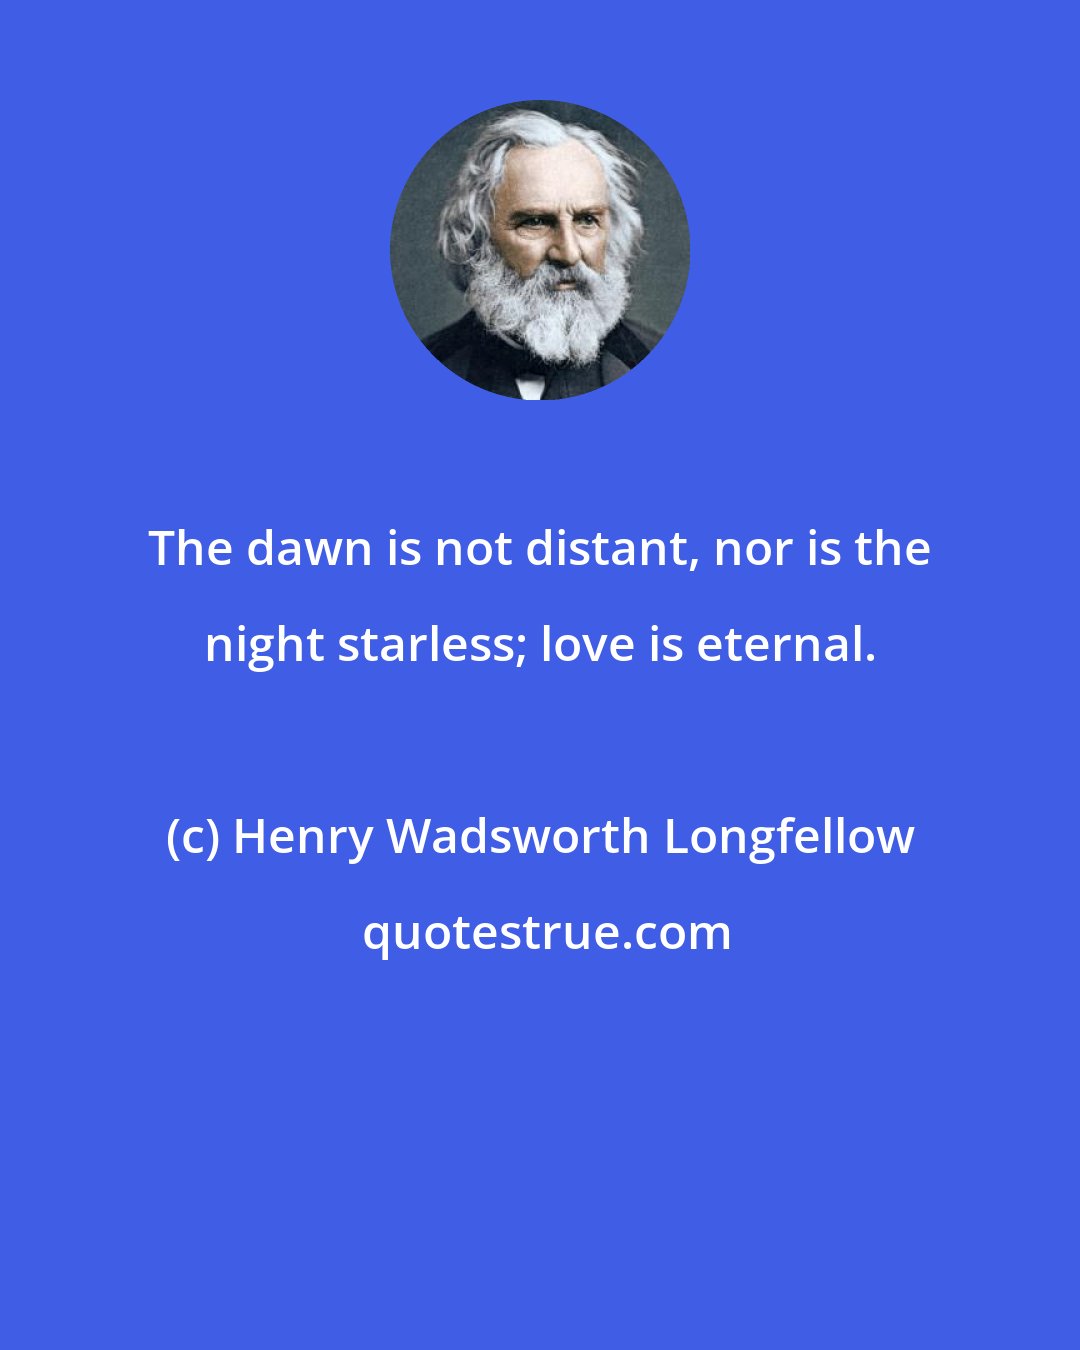 Henry Wadsworth Longfellow: The dawn is not distant, nor is the night starless; love is eternal.